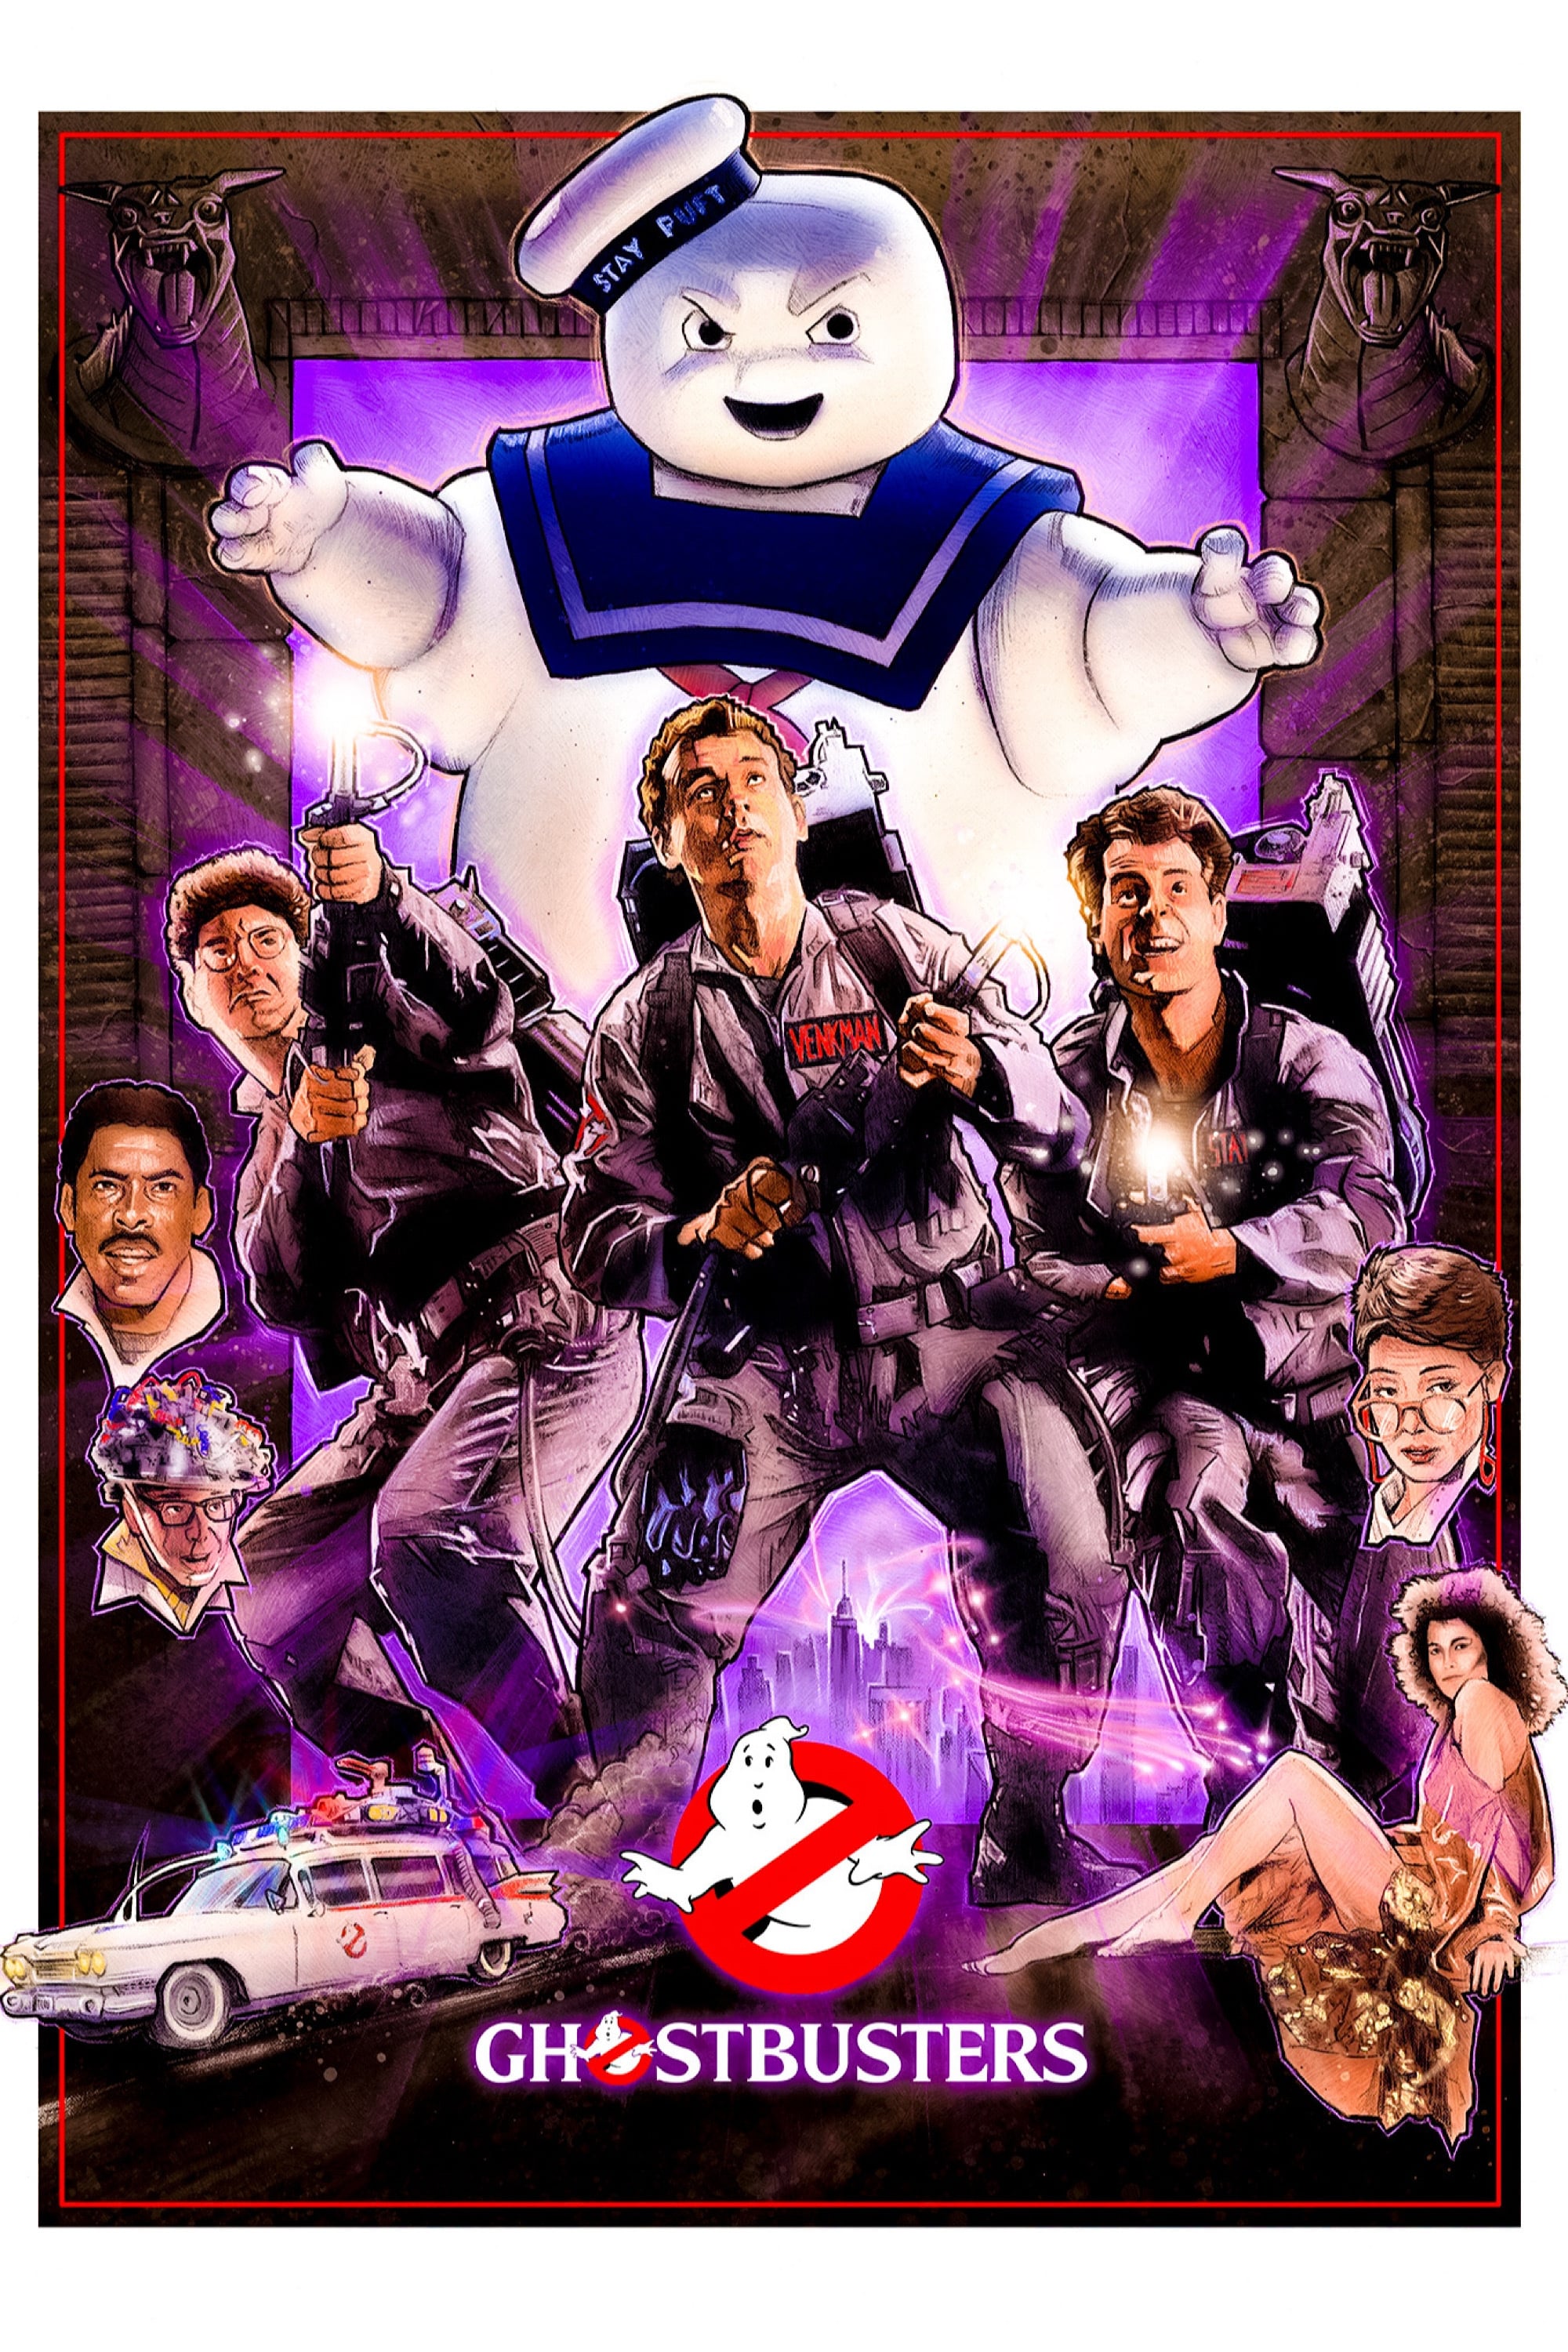 Ghostbusters (1984) REMUX 4K HDR Latino – CMHDD